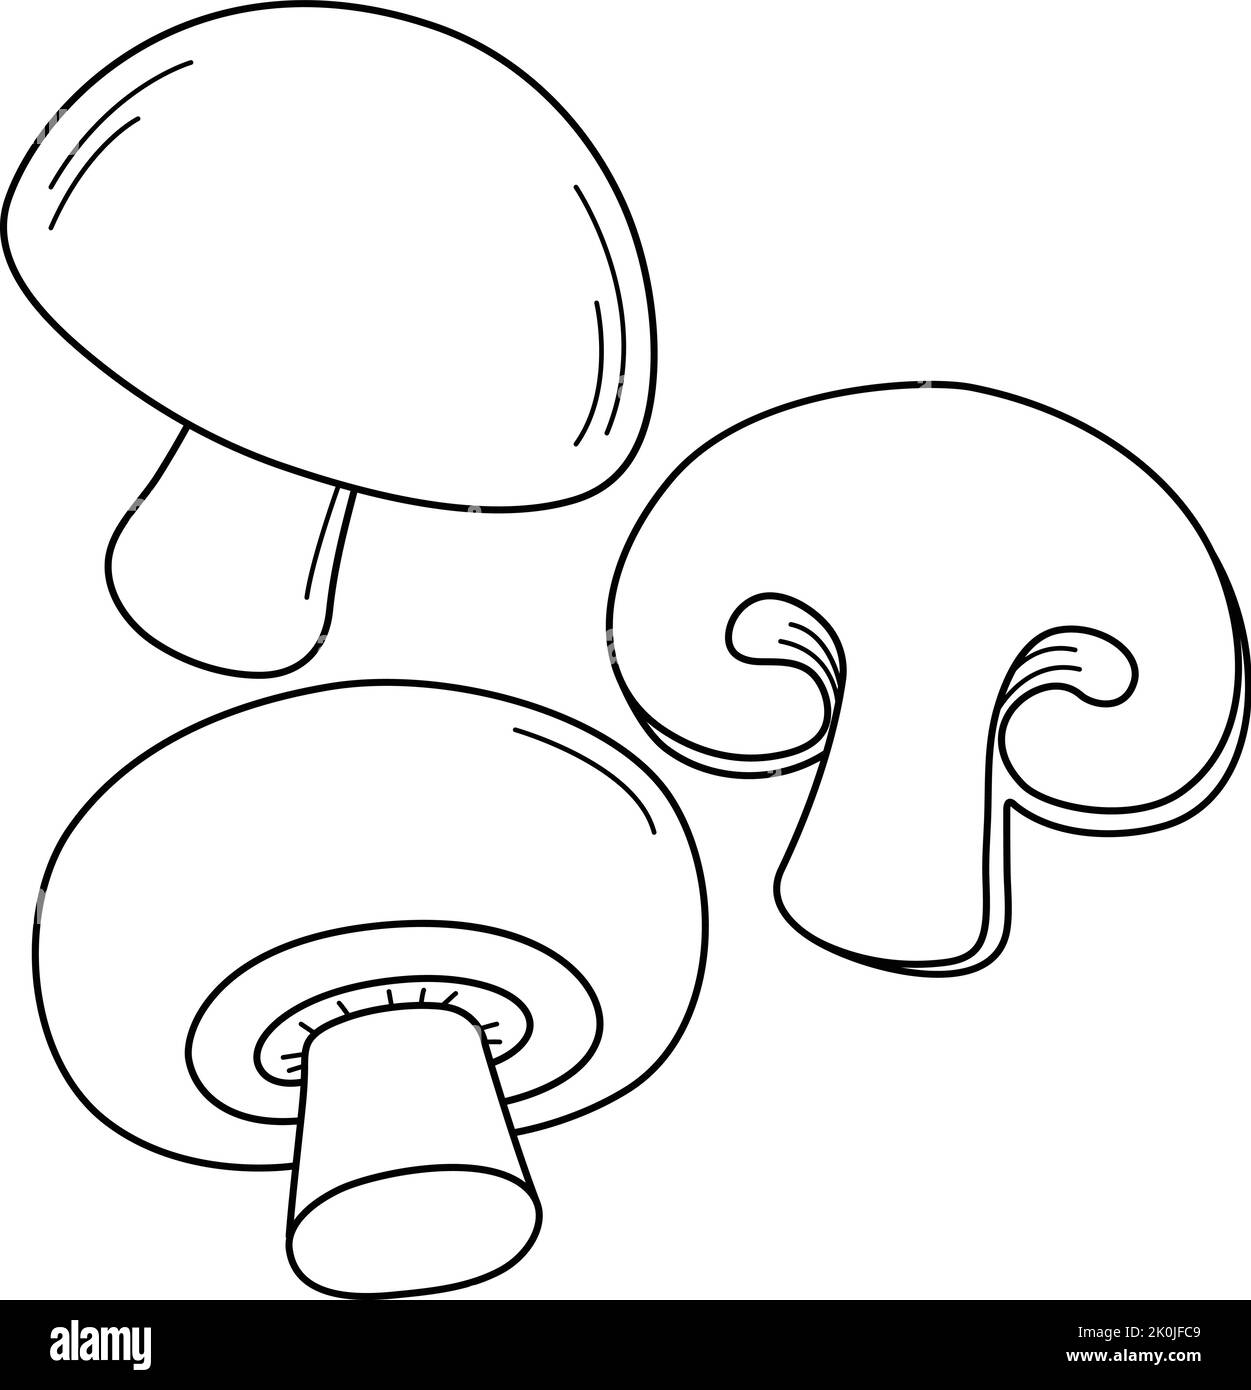 Mushroom Vegetable Isolated Coloring Page  Stock Vector